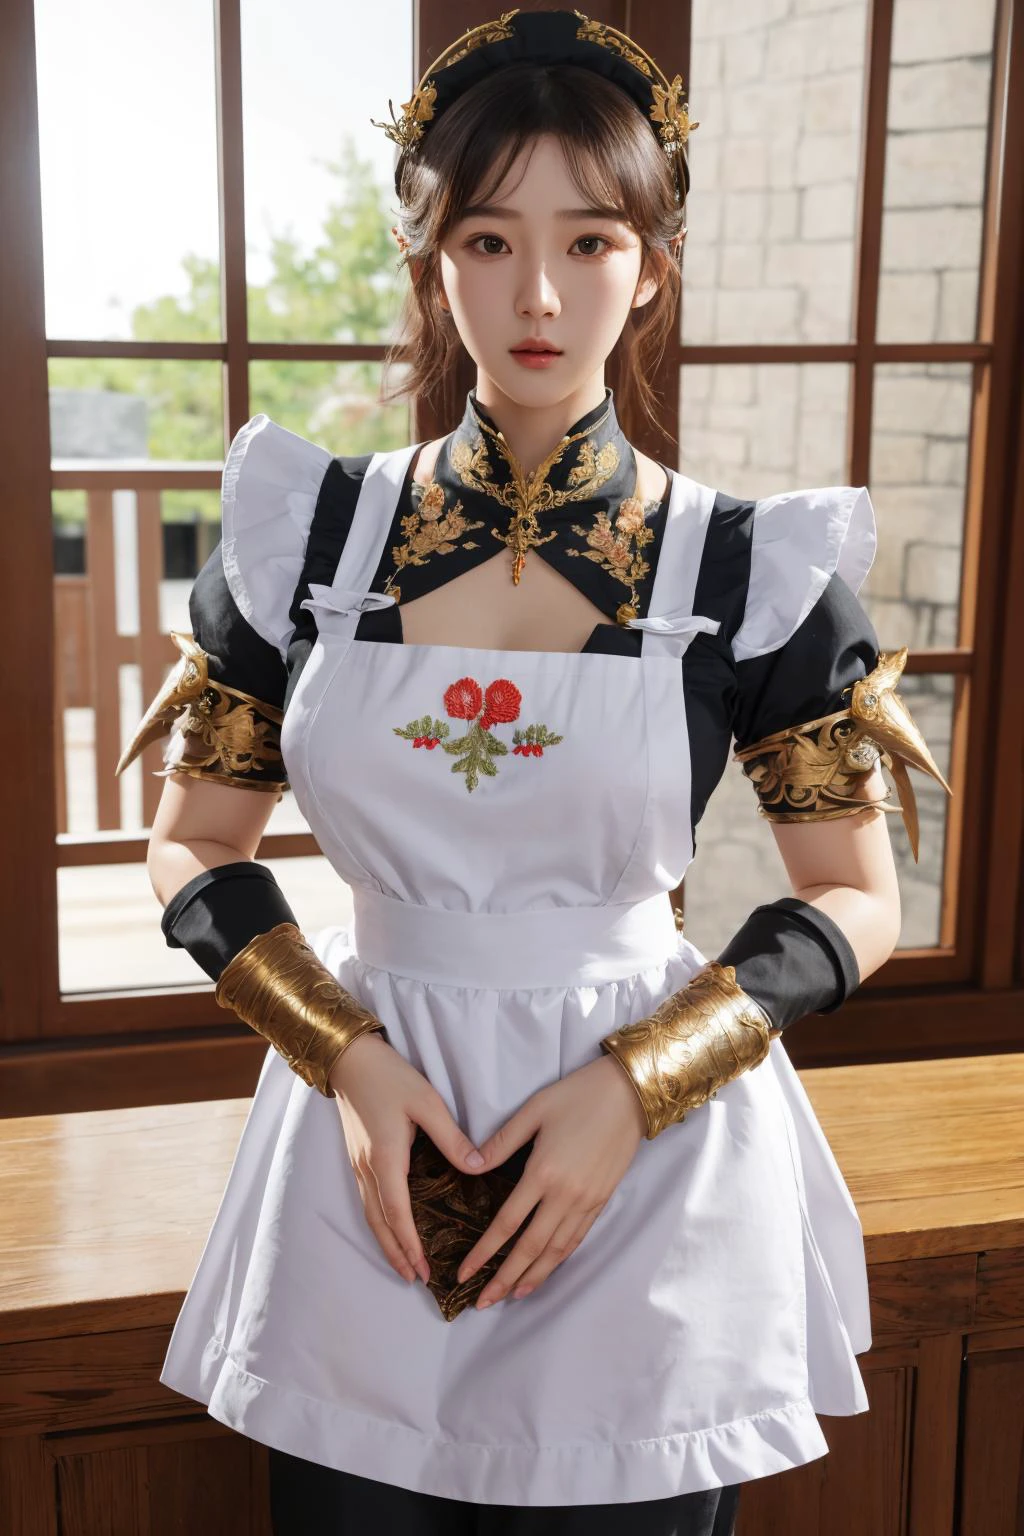 edgLnF, best quality, masterpiece, illustration, realistic, photo-realistic, amazing, finely detail, incredibly absurdres, huge filesize, ultra-detailed, highres, extremely detailed CG unity 8k wallpaper, nsfw, golden embroidery, pauldrons,wearing edgLnF,edgApron, a woman in a maid apron, wearing edgApron, pauldrons, gauntlets, bracer, elbow pads, A beautiful young woman with Korean-style facial features resembling a popular actress.